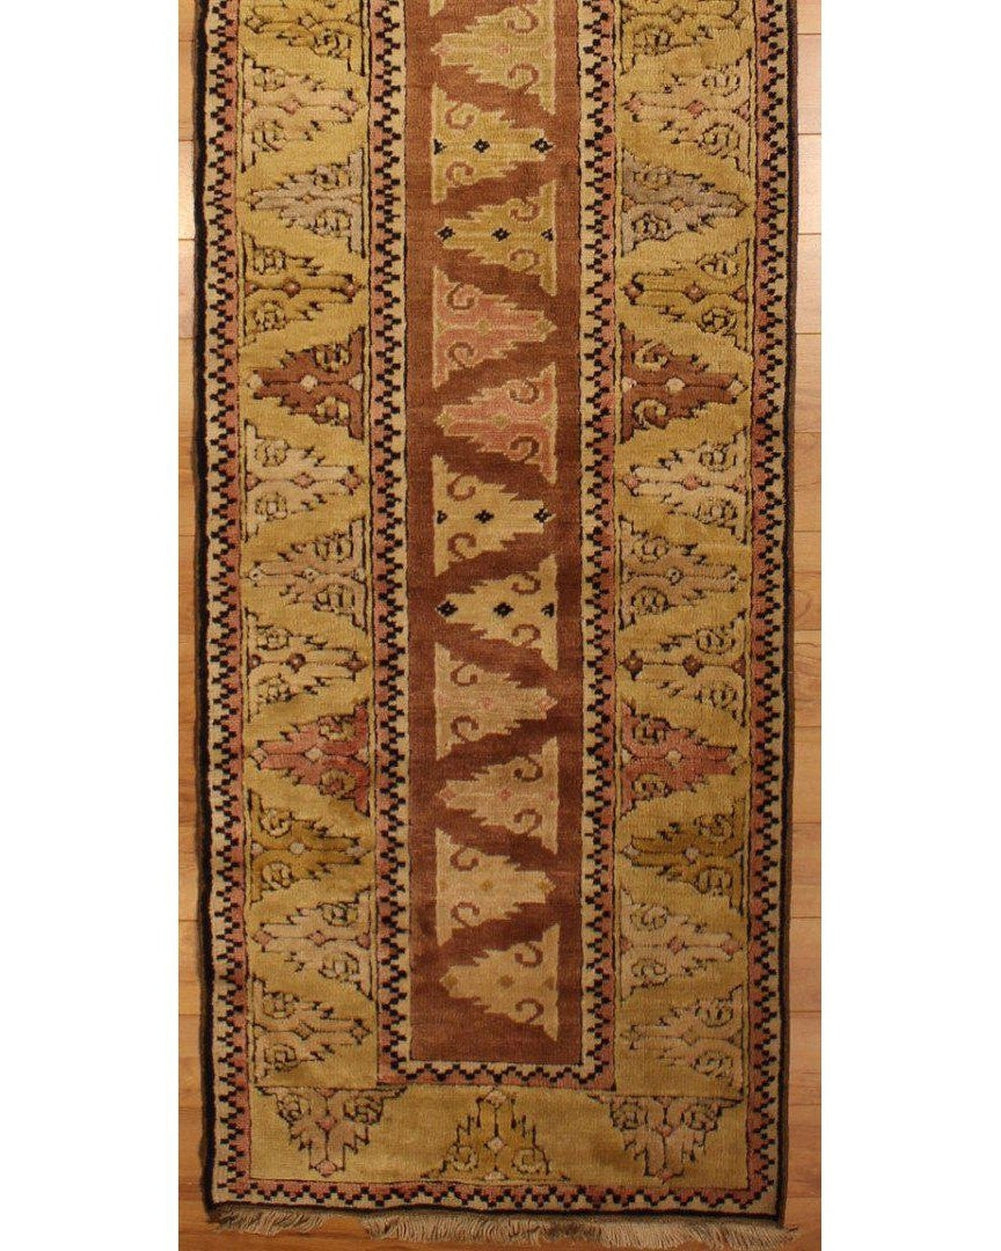 Area rug for living space and any room. Floor decor, rugs and carpets from Tabrizi Rugs. Milas Runner - 2'5